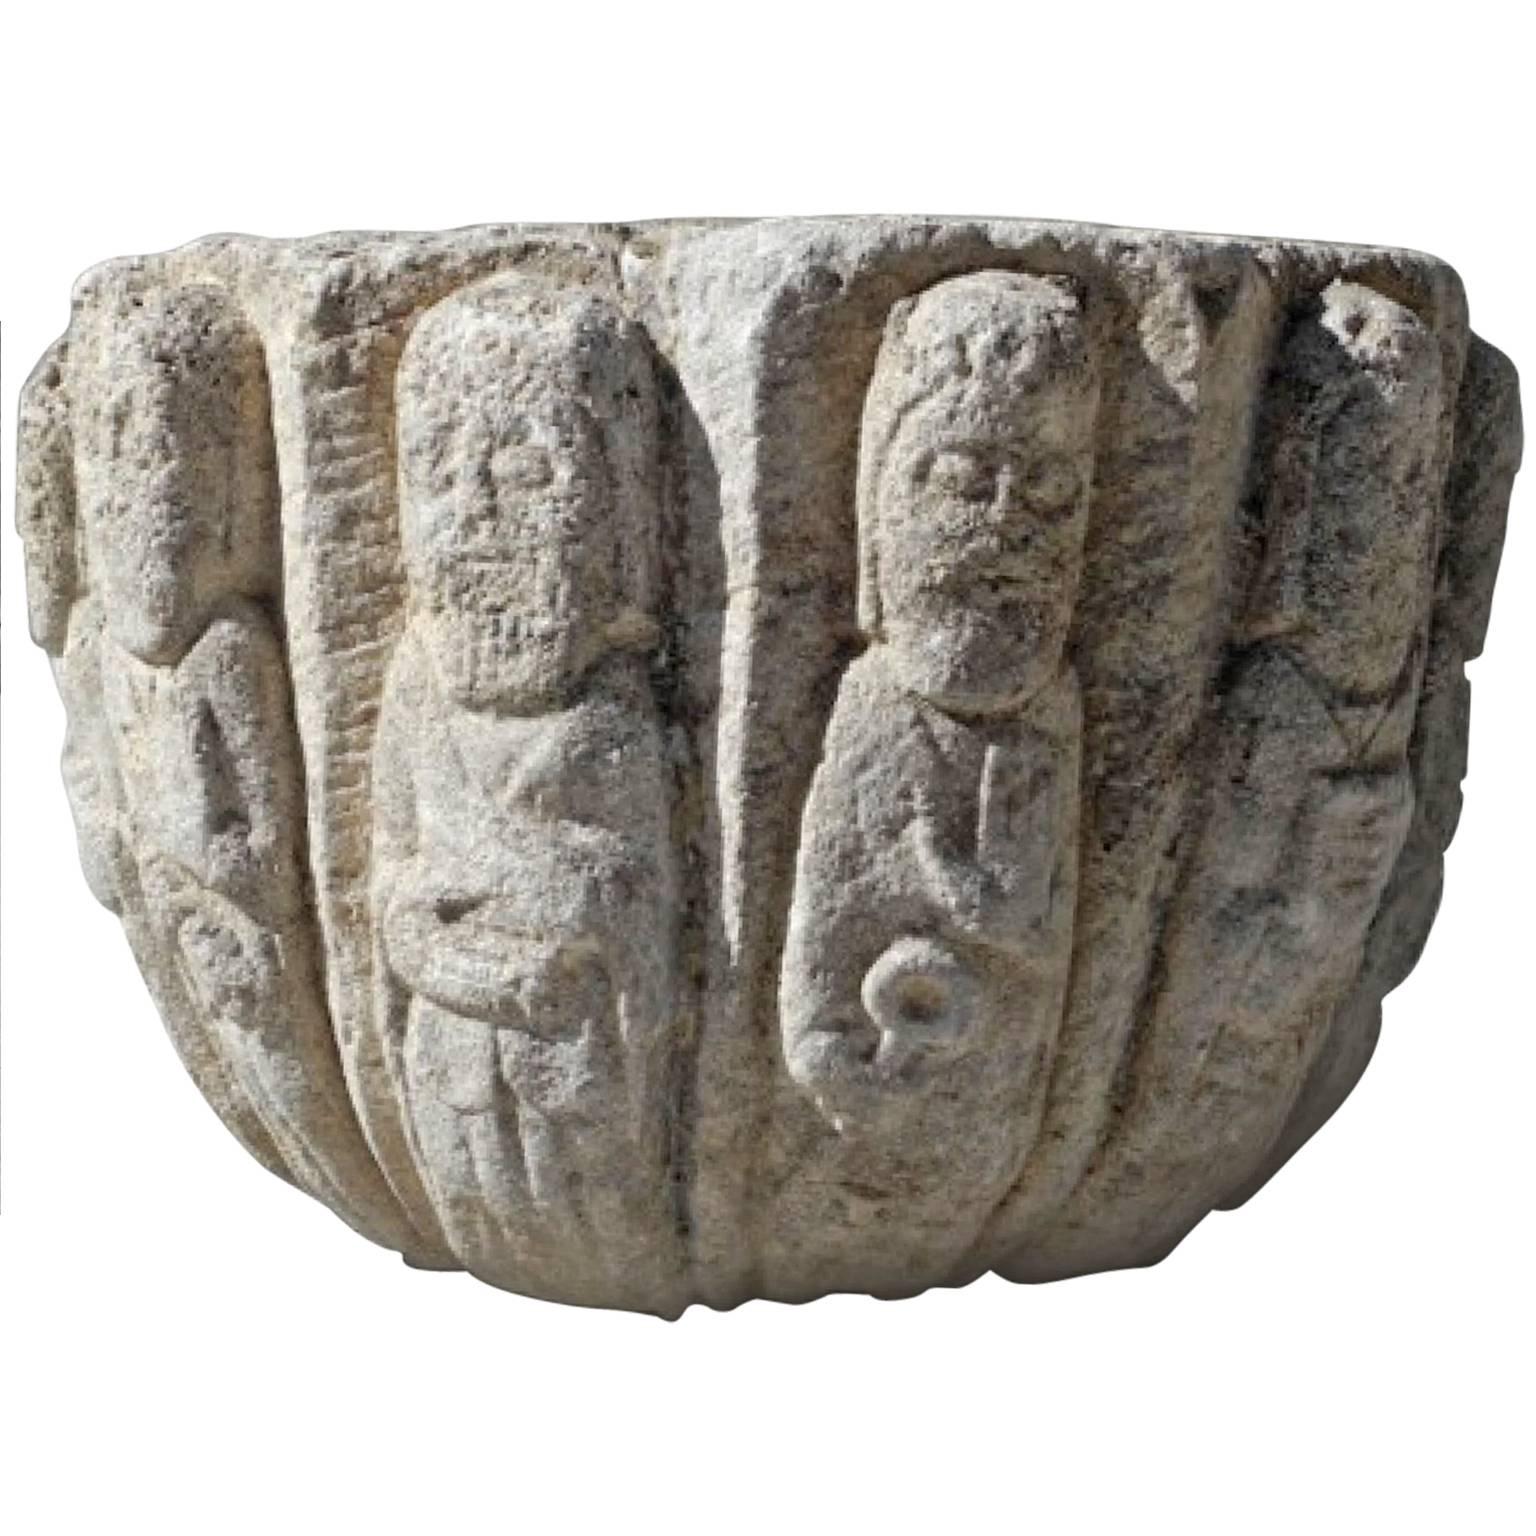 Antique Stone Baptismal Font from the 14th Century Depicting the 12 Apostles